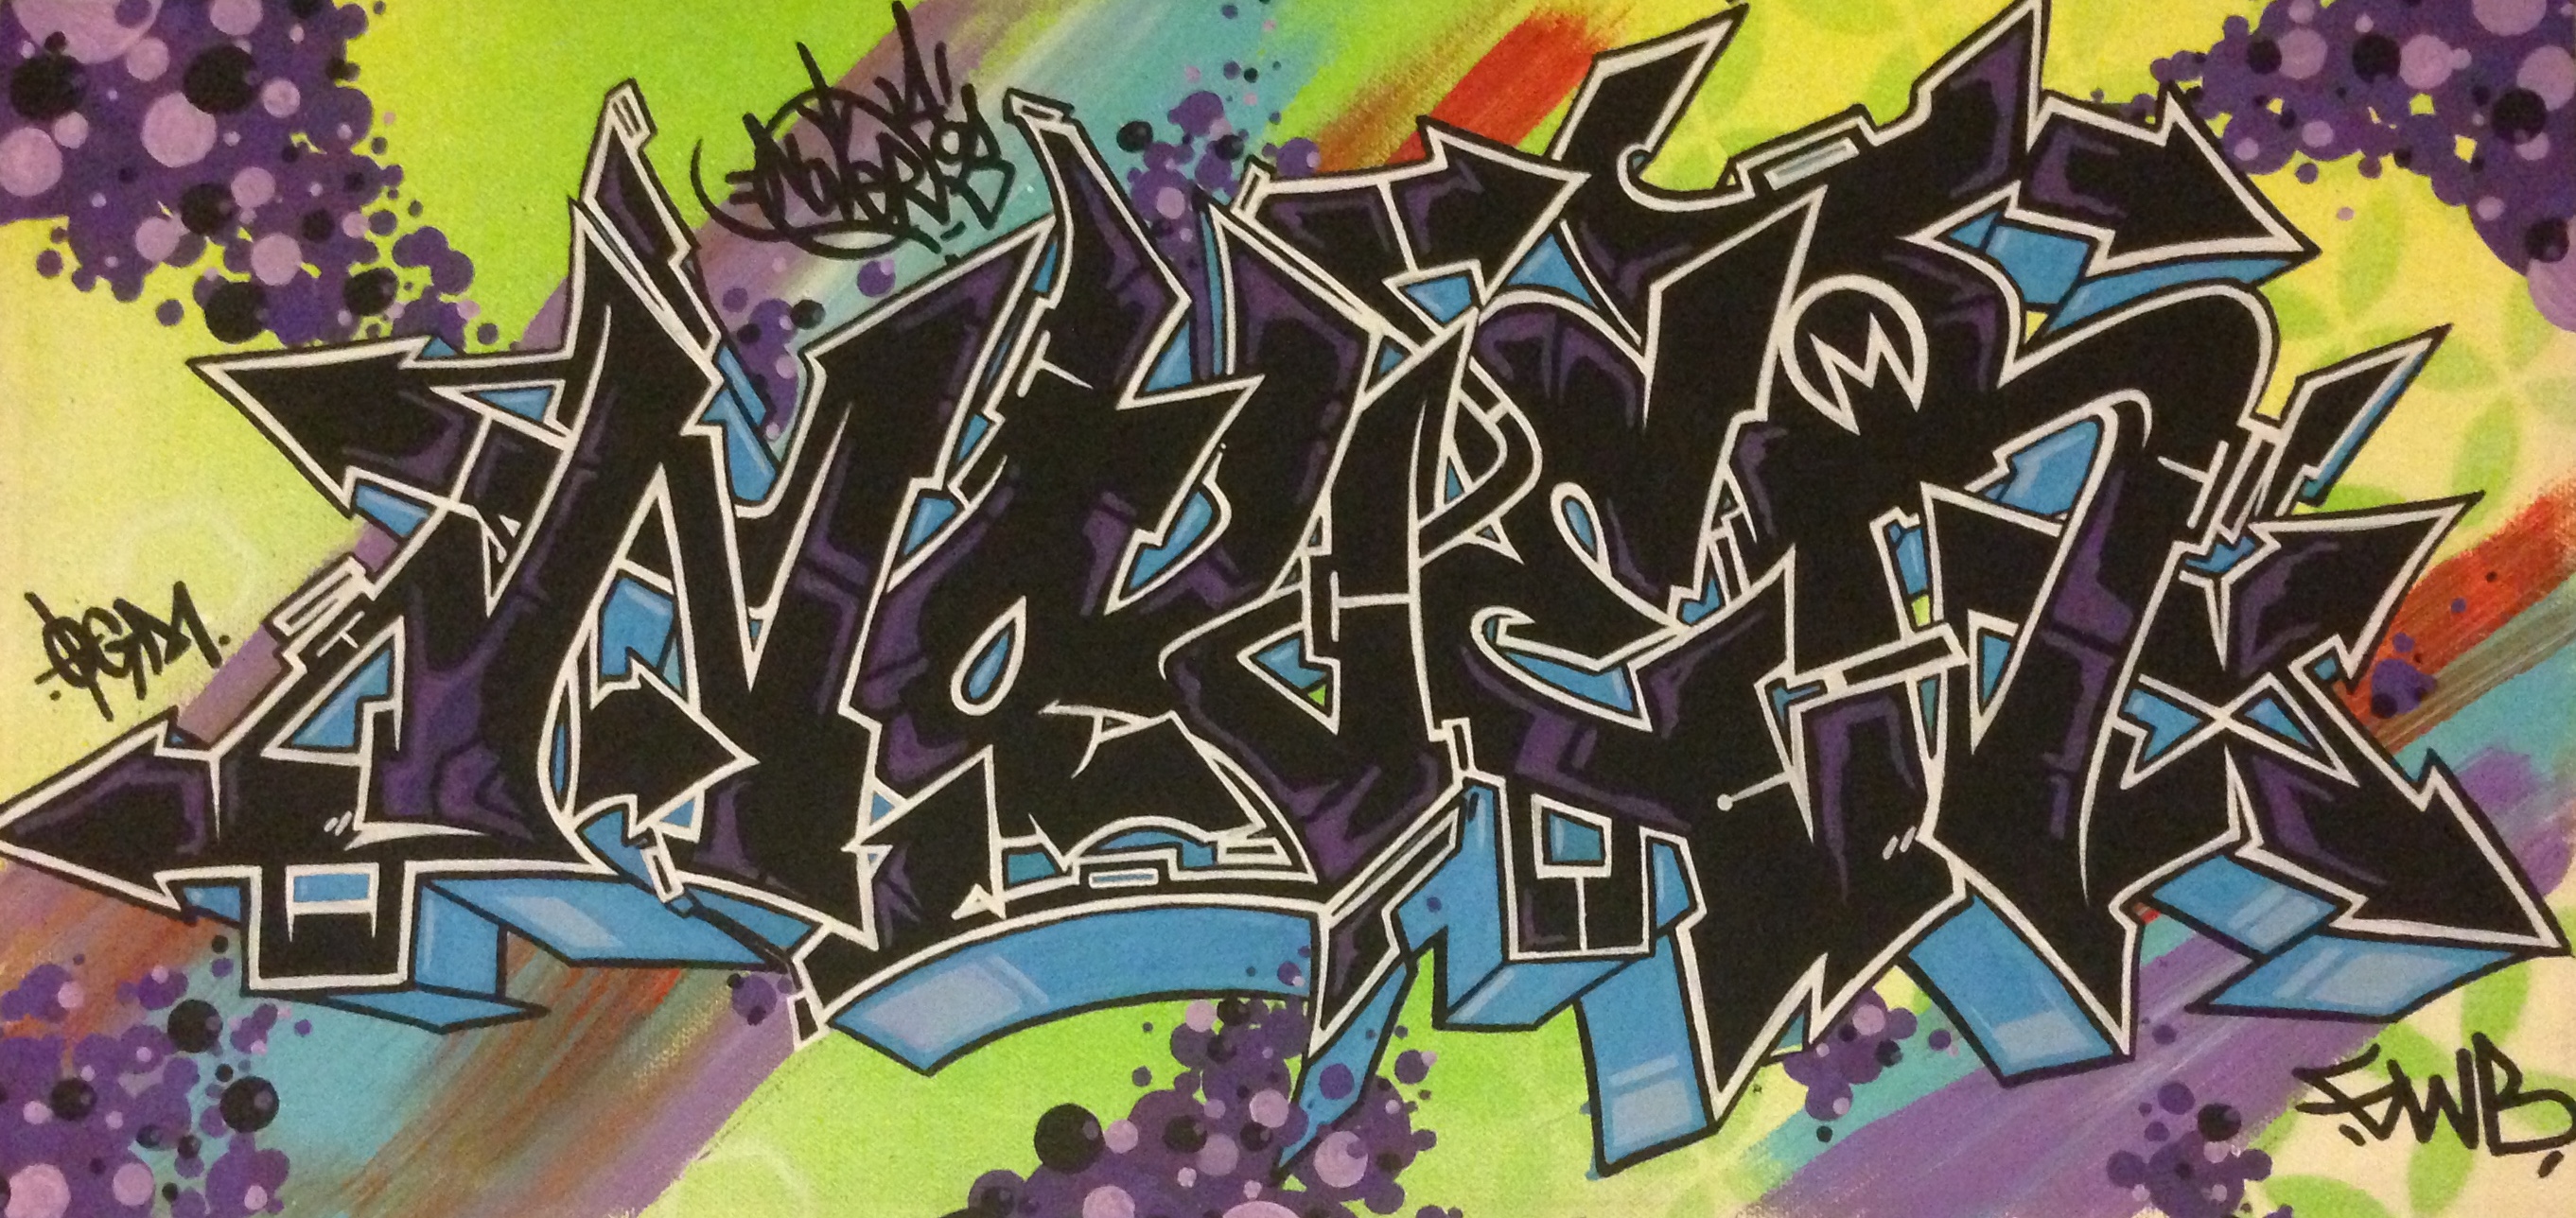 Nover, Canvas with Markers & Spray Paint. 2014.